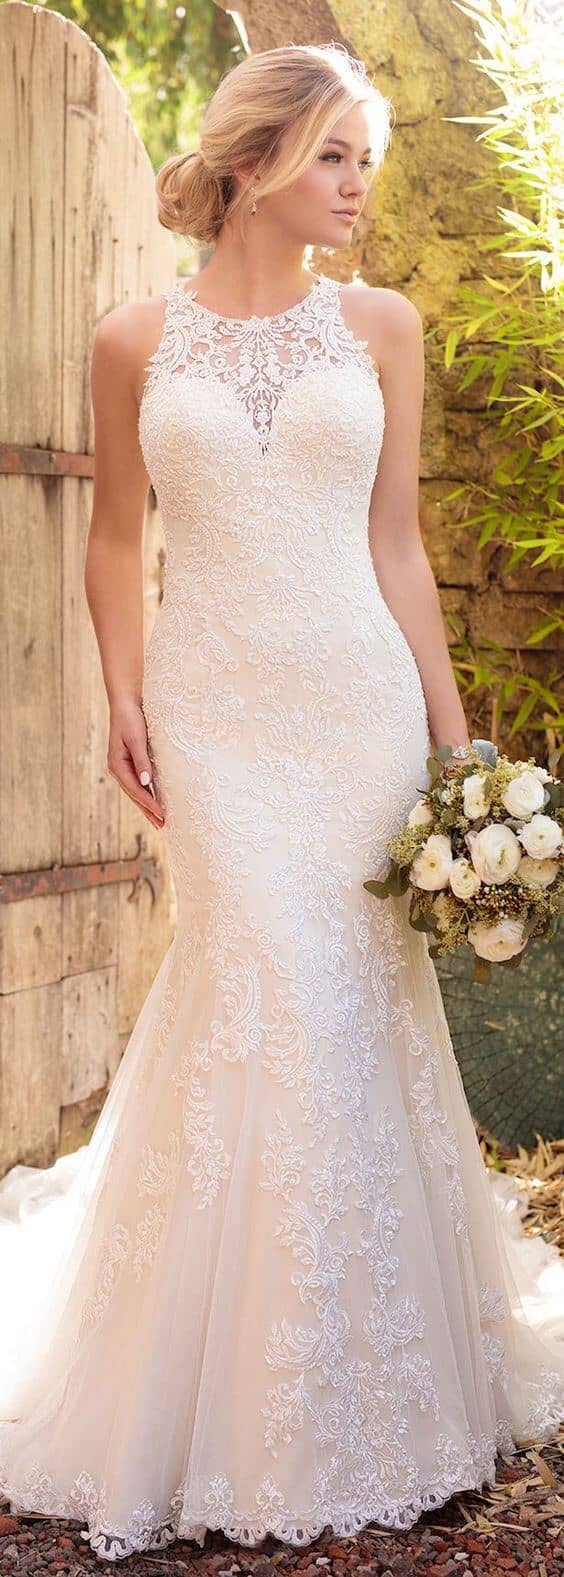 All-Over Lace Sleeveless Jewel Neck Mermaid Gown